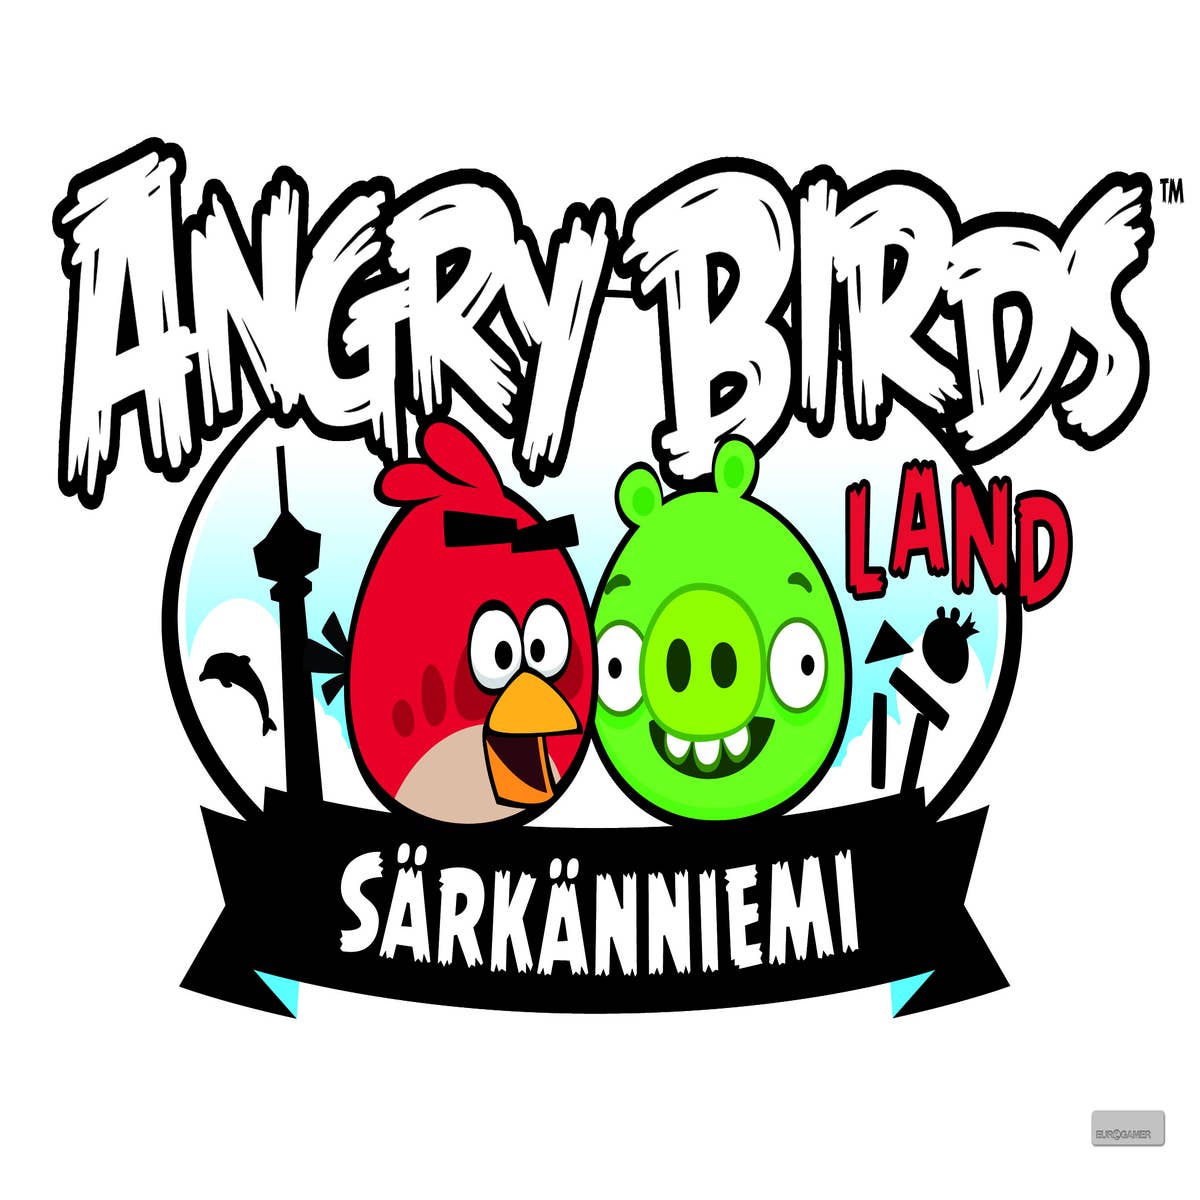 Angry Birds Land opens at Finnish theme park 